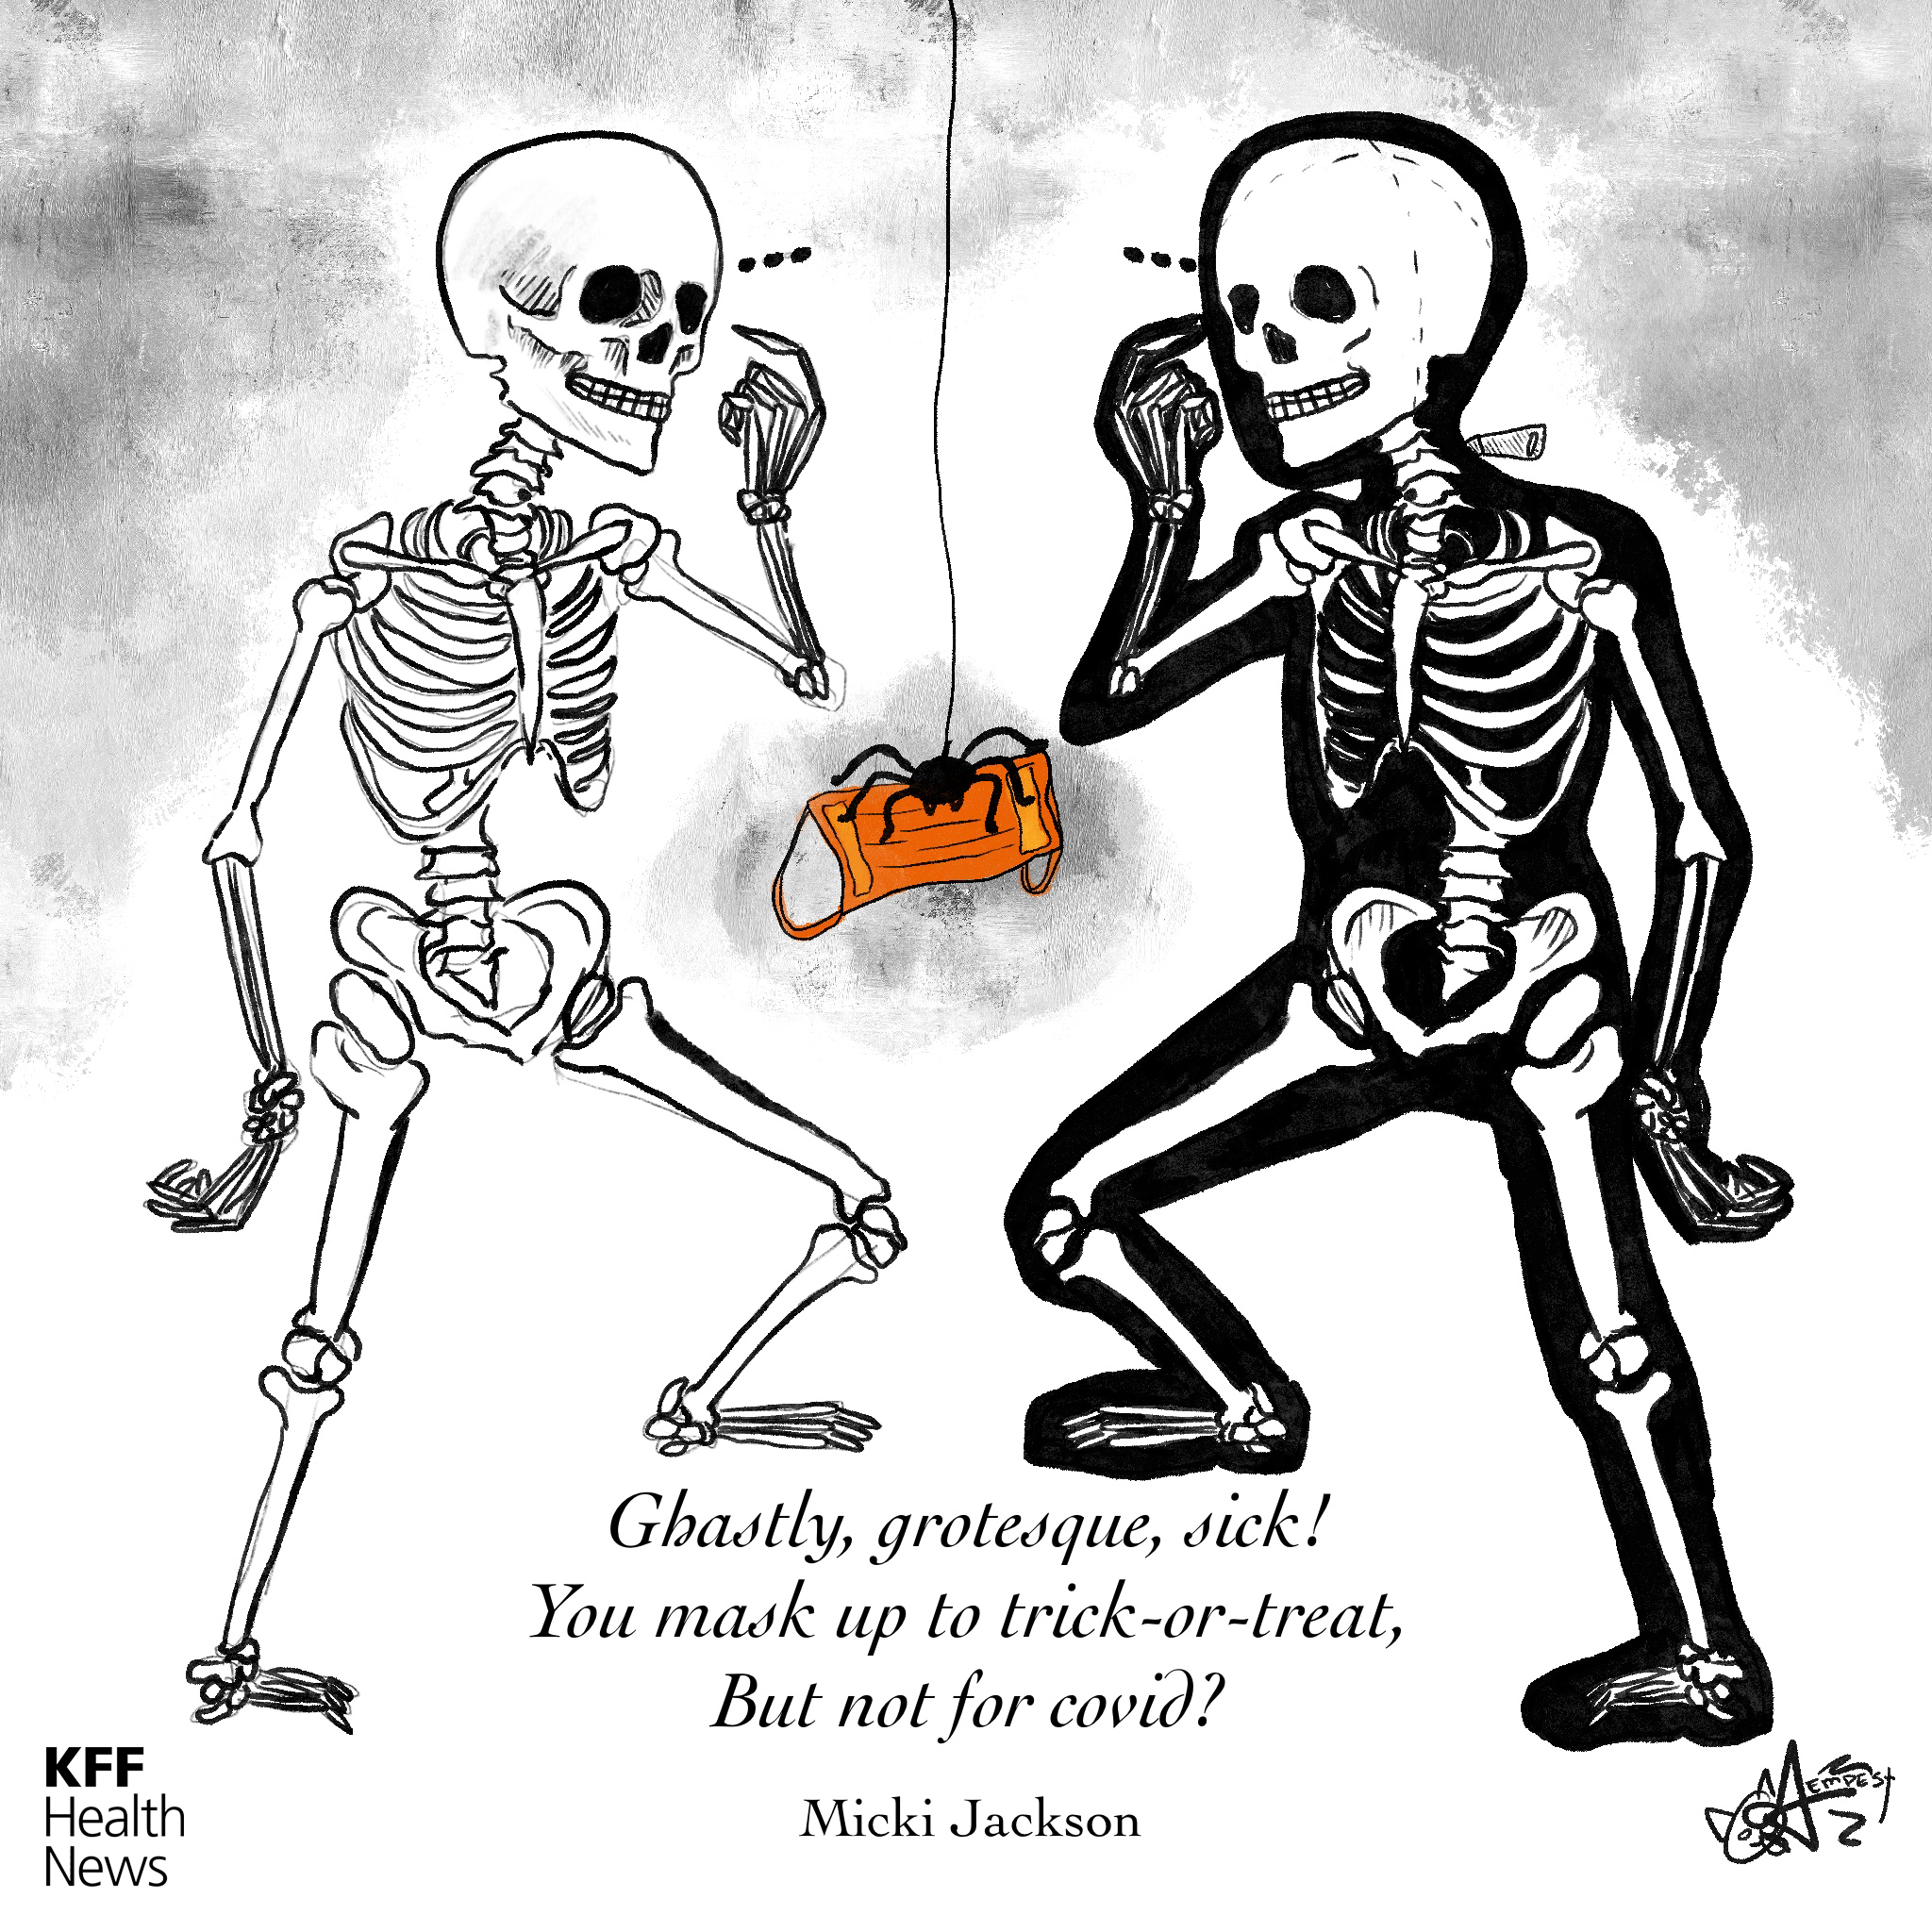 A black and white cartoon drawing shows two skeletons in a mirrored position looking at each other. One is a real skeleton while the other is a human in a costume. They are thinking. A spider holding a face mask is hanging between them. Below the drawing, a haiku reads: "Ghastly, grotesque, sick! / You mask up to trick-or-treat, / But not for covid?"